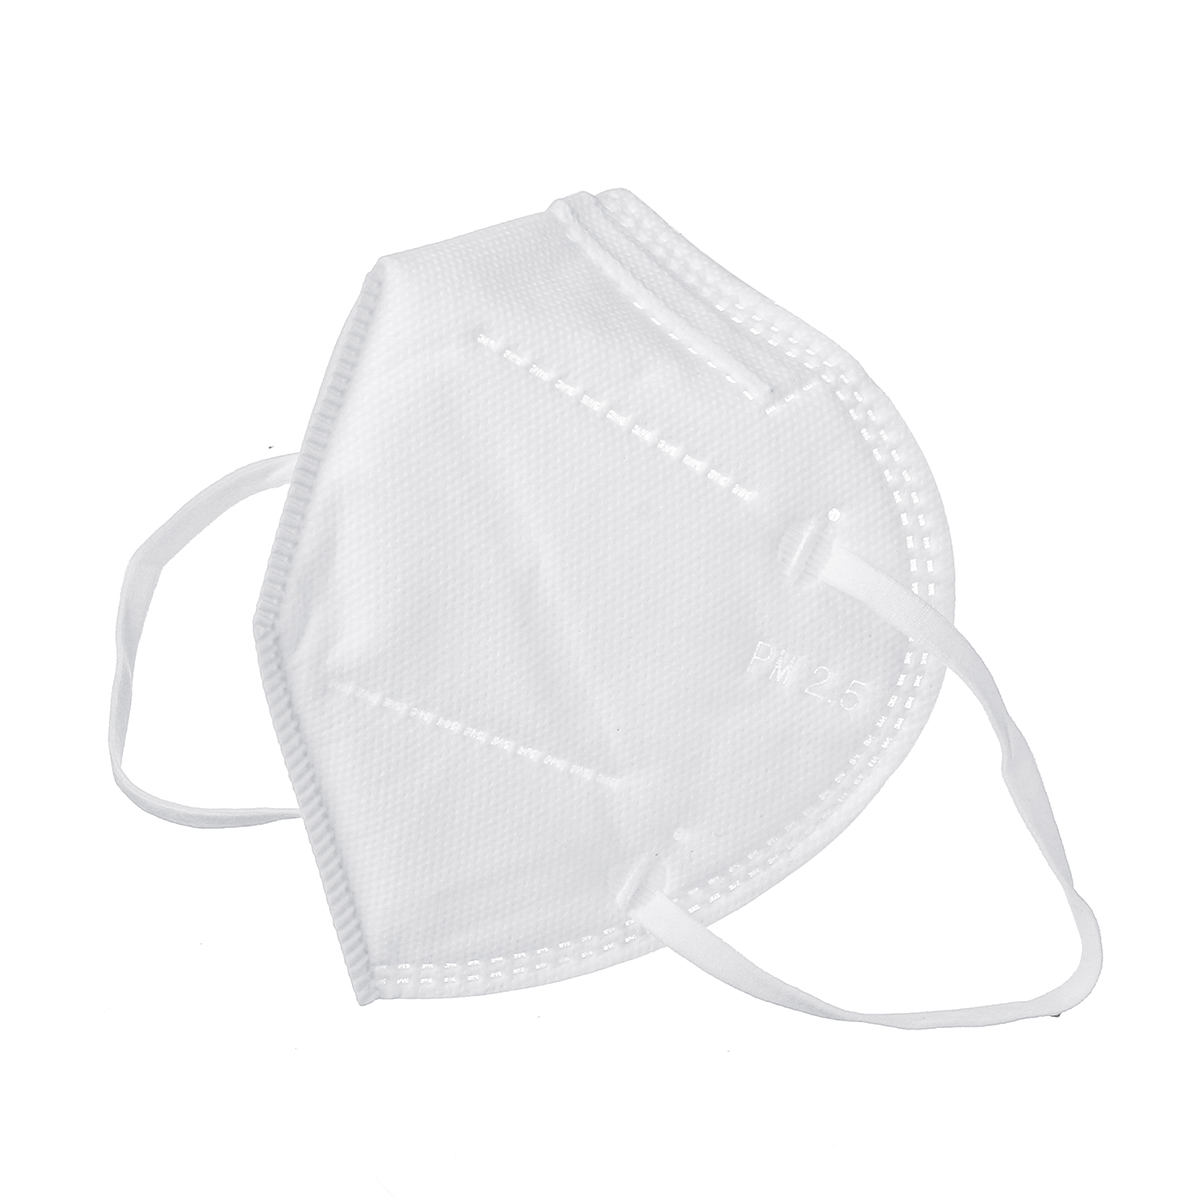 2Pcs-PM25-High-Quality-Mouth-Cover-Filter-Mask-Dustproof-Particulate-Respirator-1643214-7